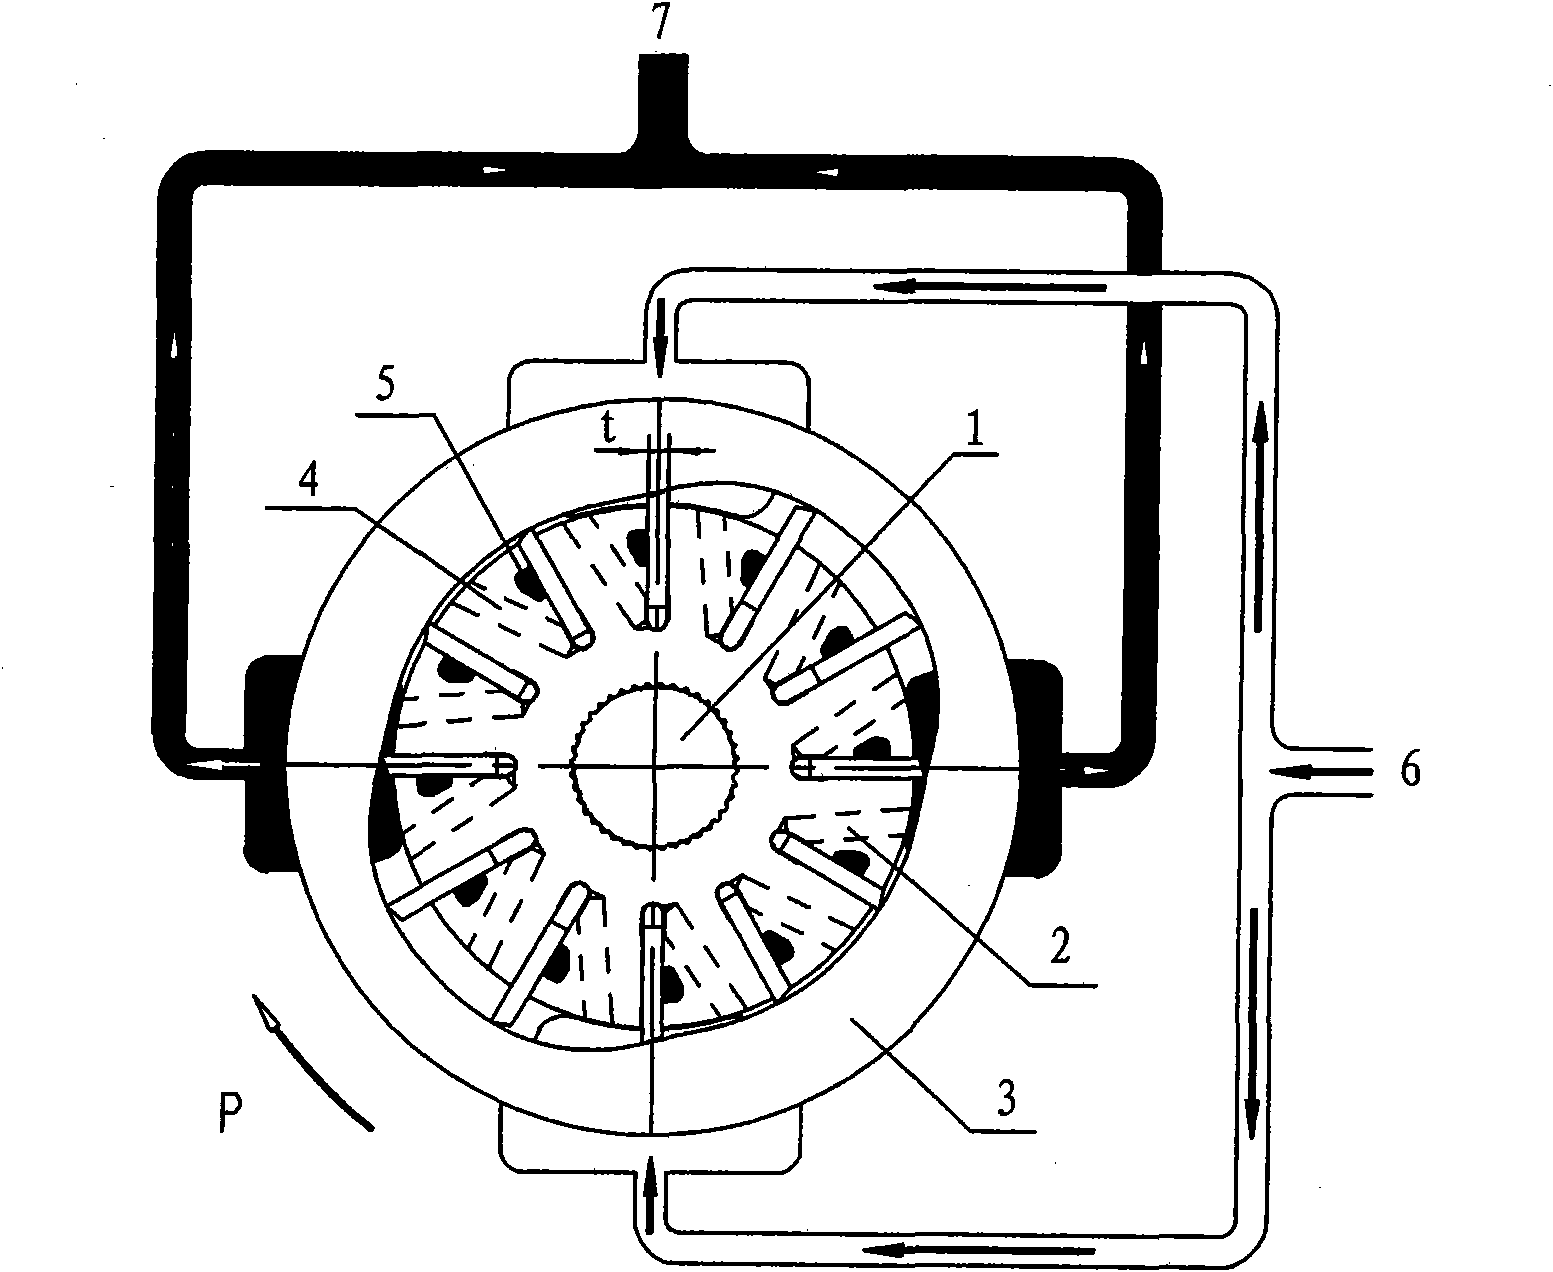 Master-auxiliary vane pump and stator decompression method